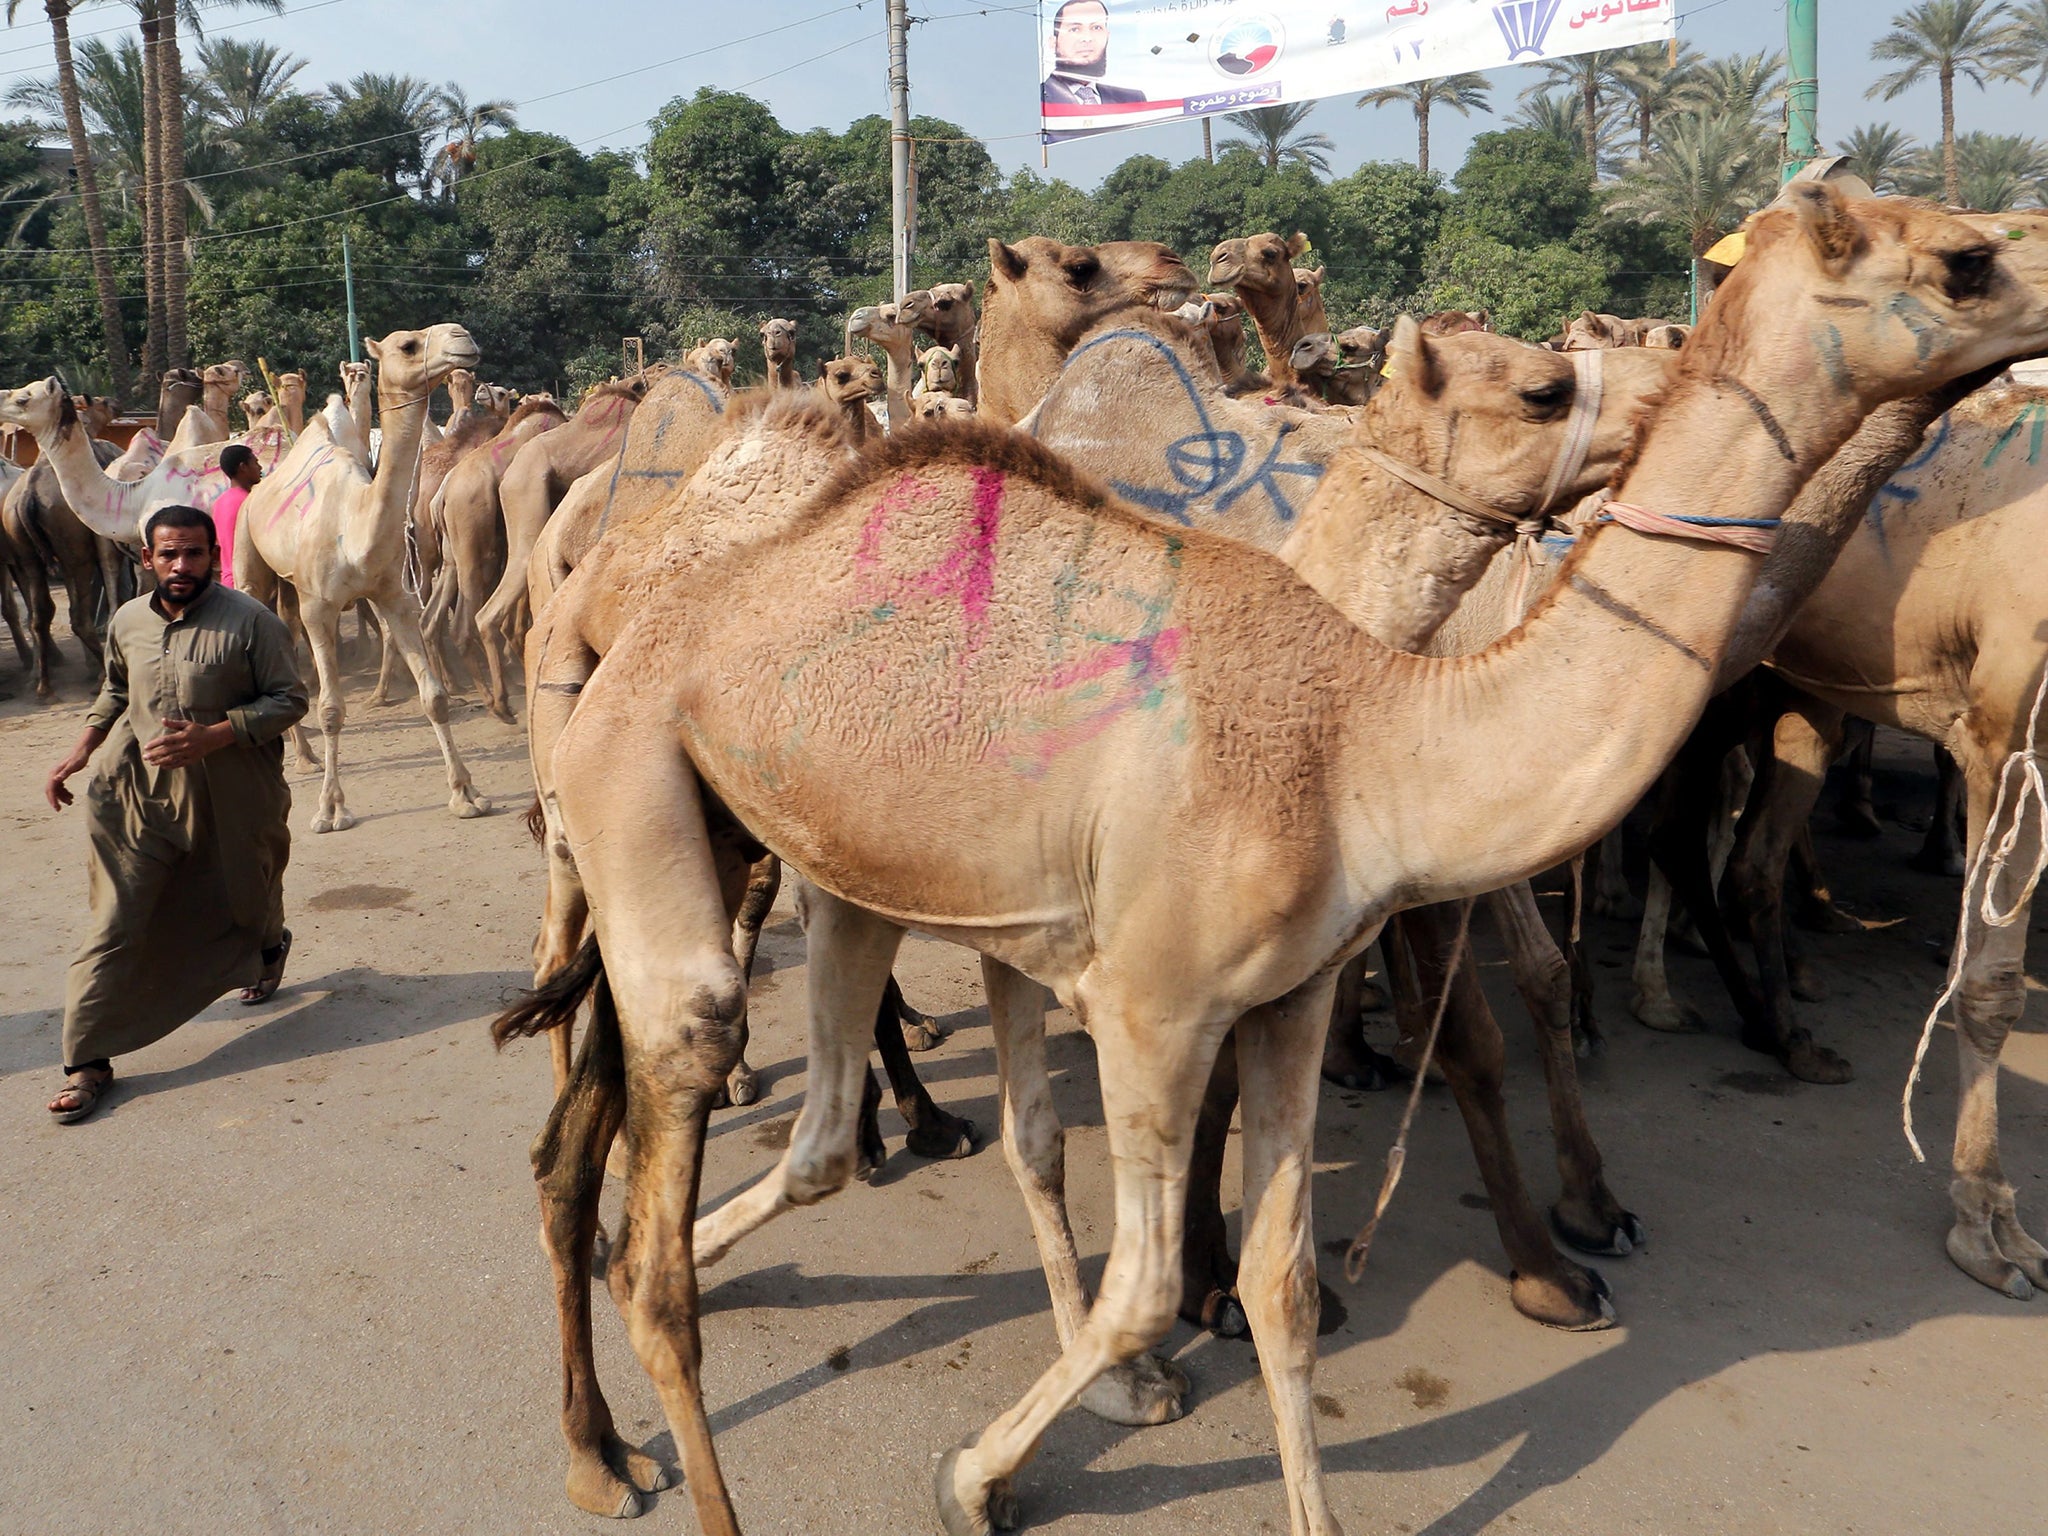 Riyadh’s camel market is one of the largest in the Arabian Peninsula